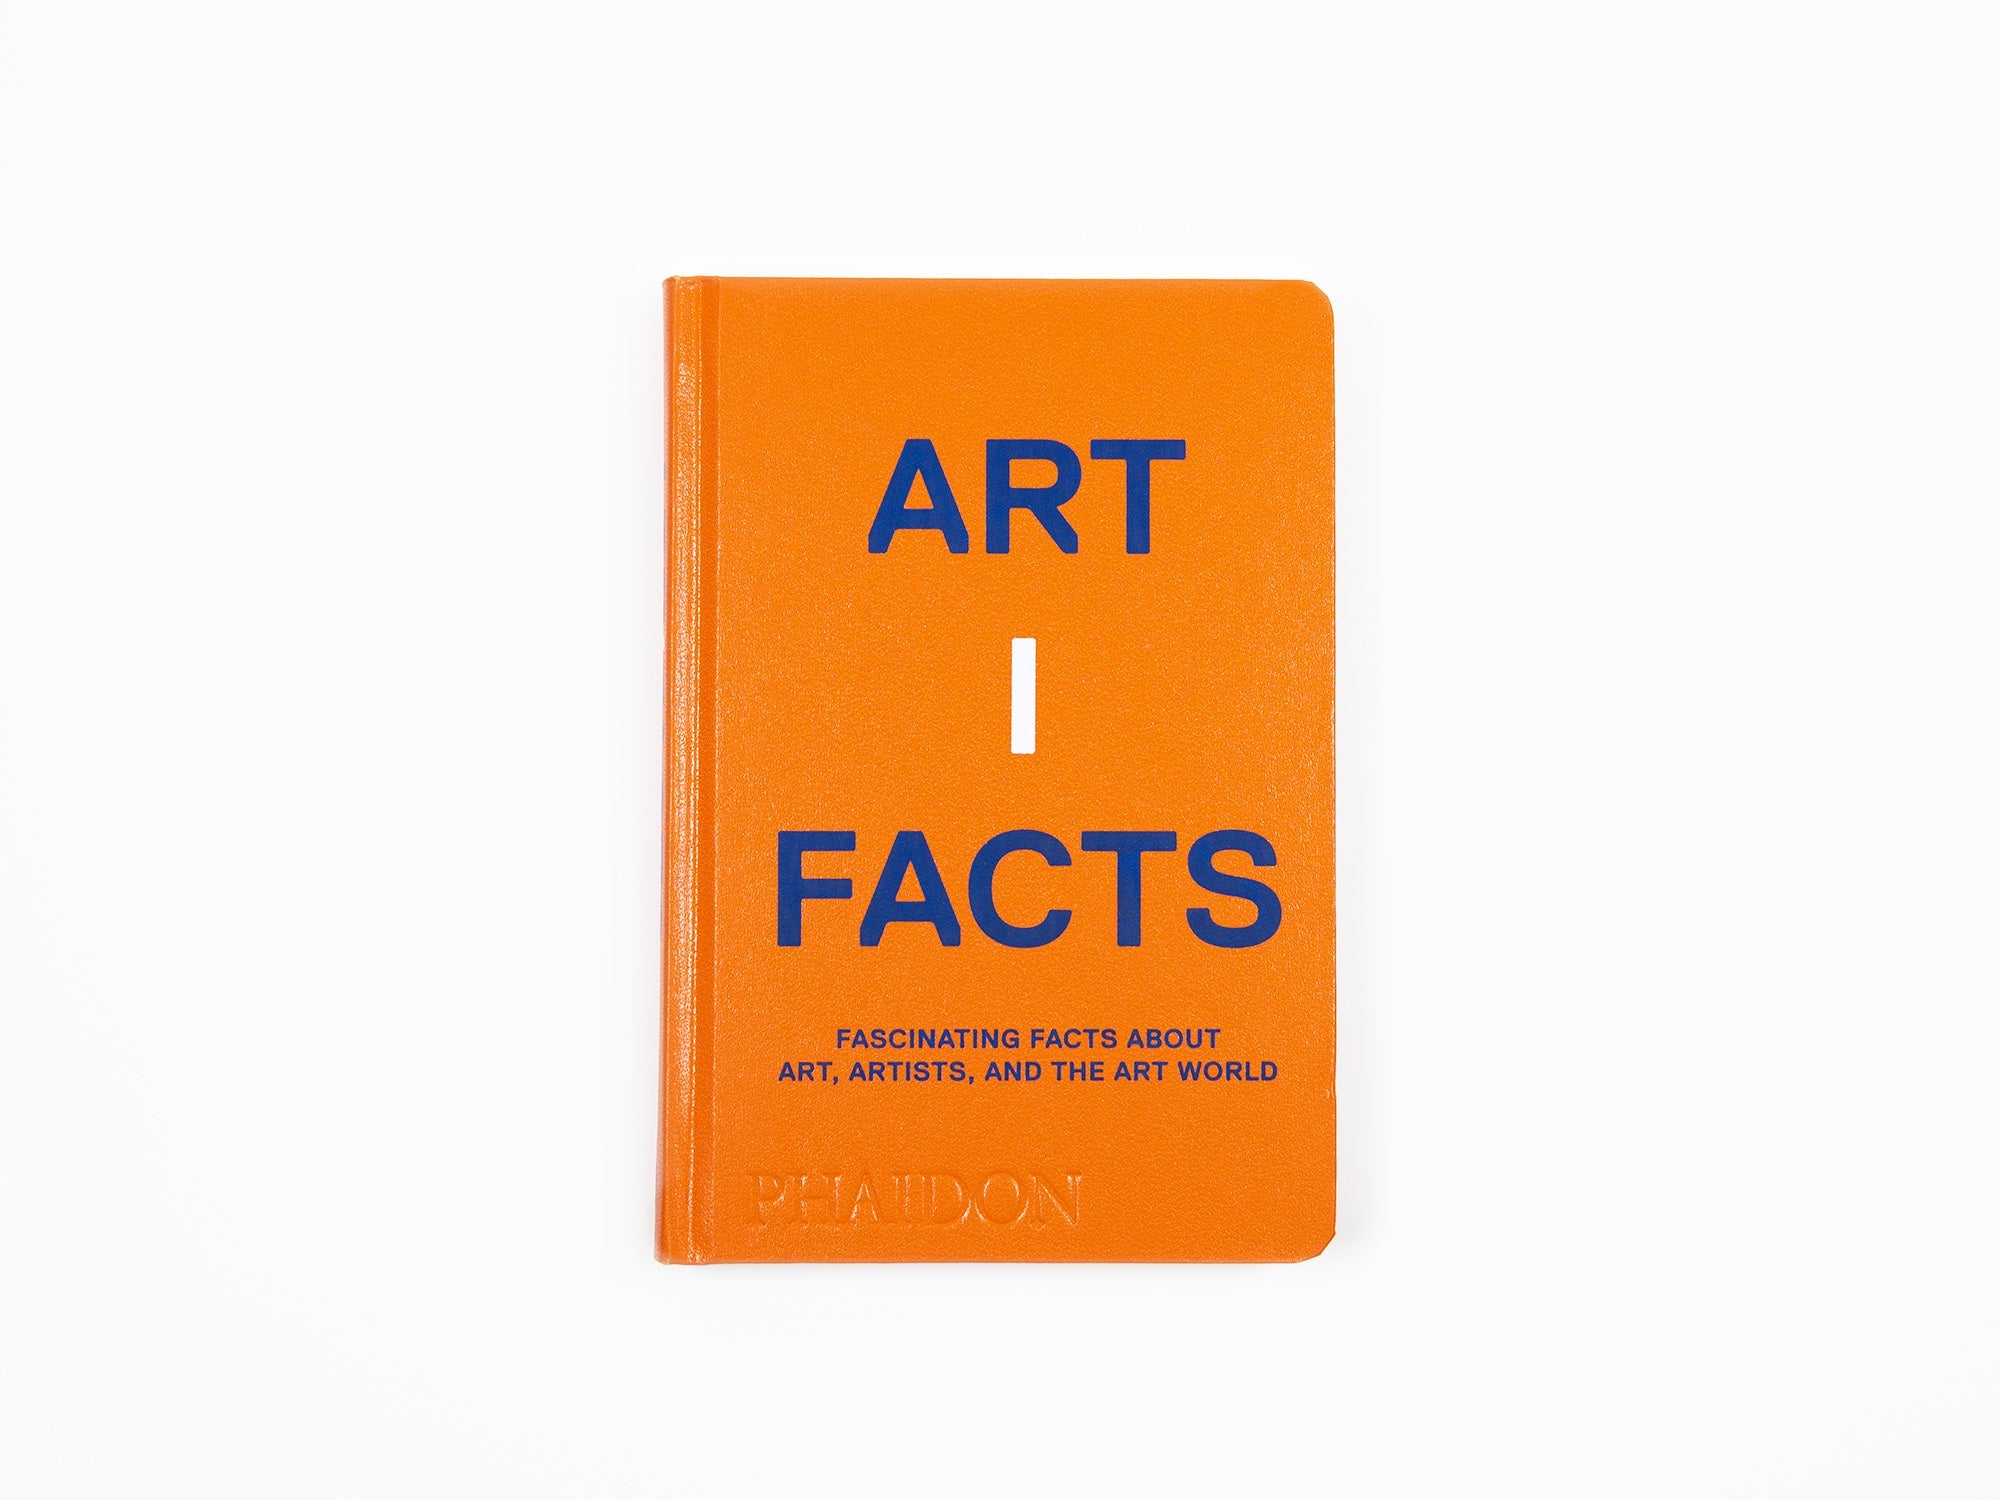 Artifacts, Fascinating facts about Art, Artists and the Art World